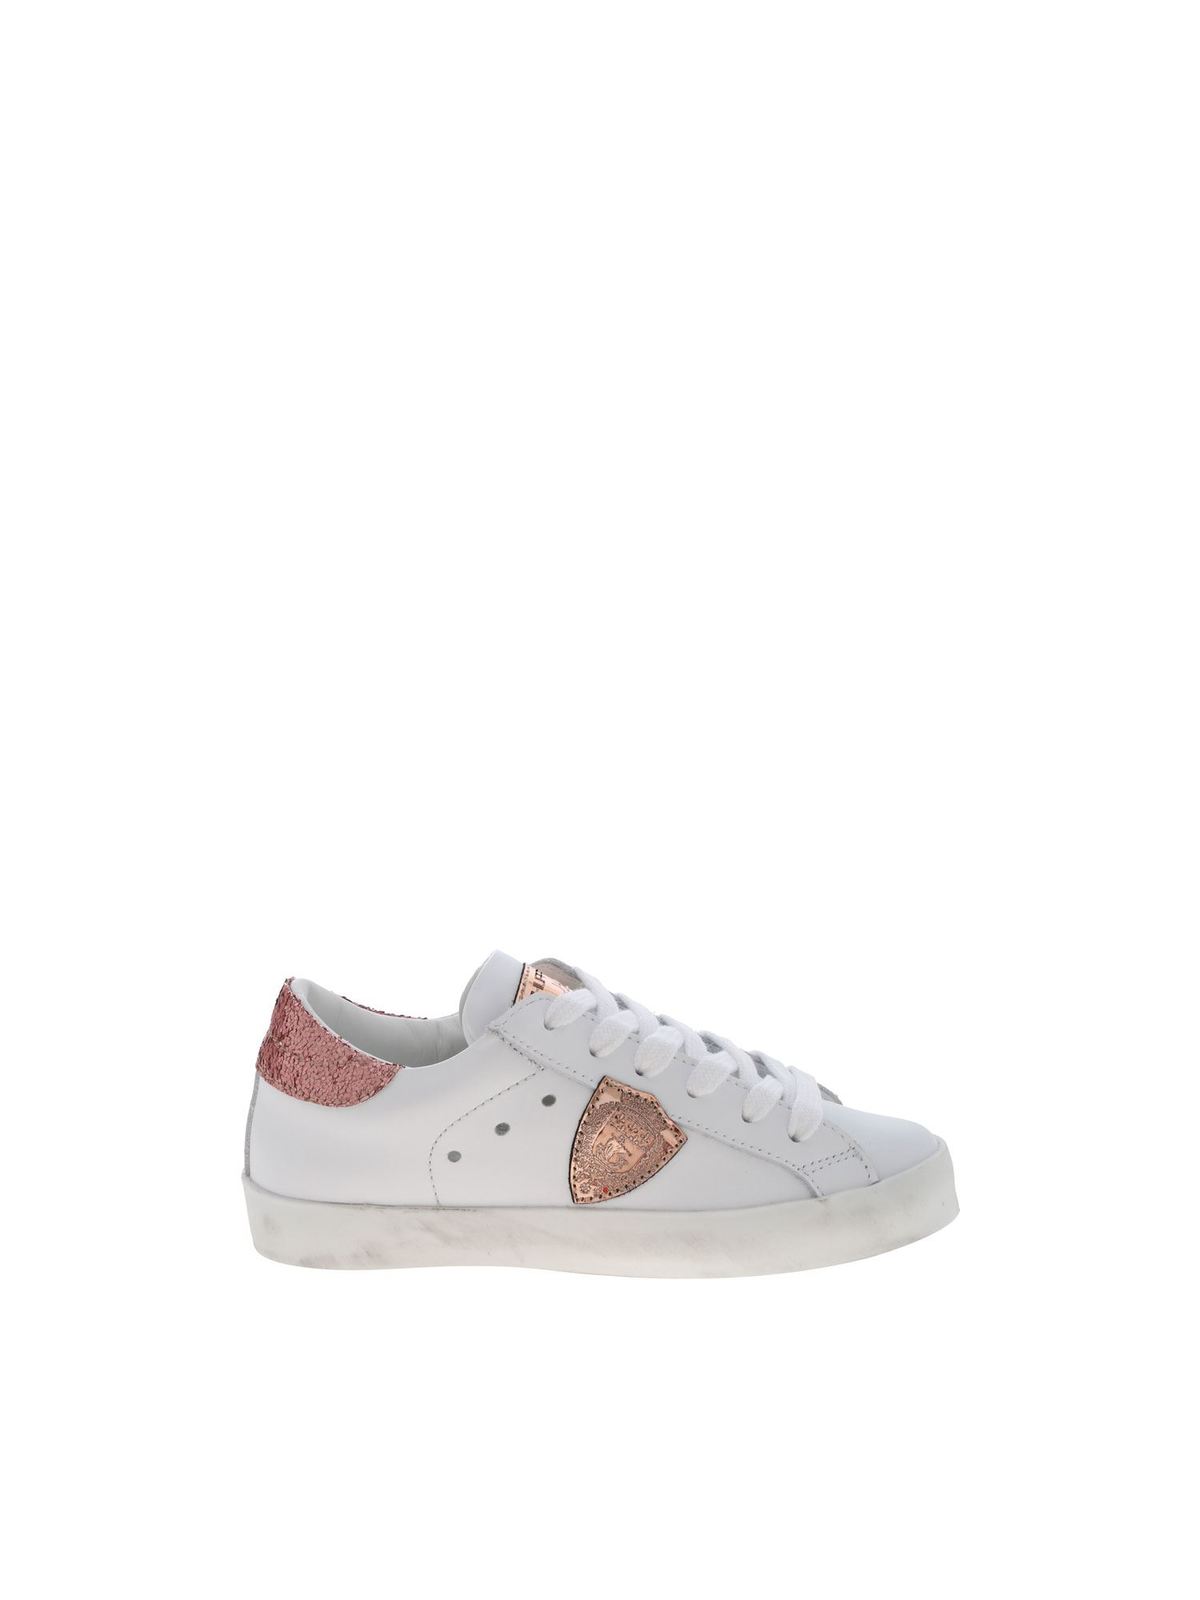 Philippe Model - Sneakers Paris bianche e rosa - sneakers - CLL0VG2A